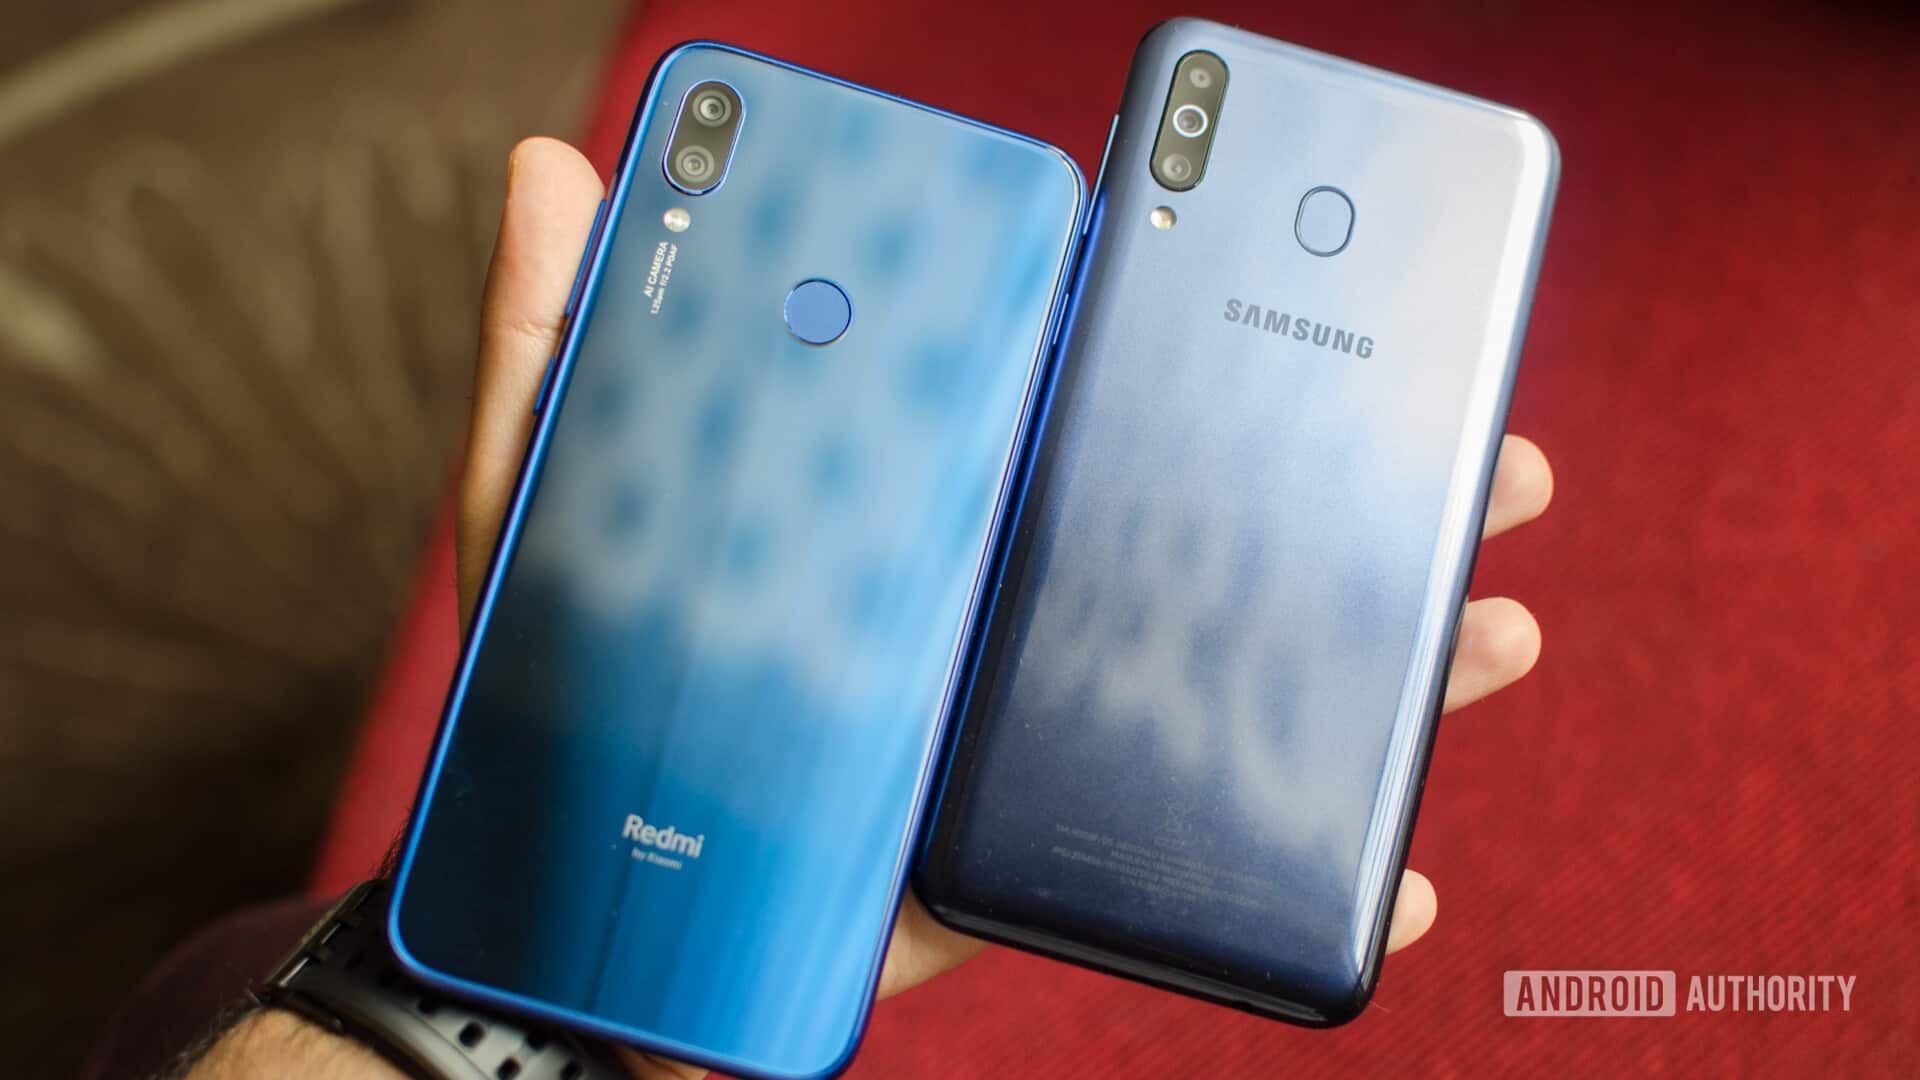 Redmi Note 7 vs Samsung Galaxy M30 both phones in hand showing back panel